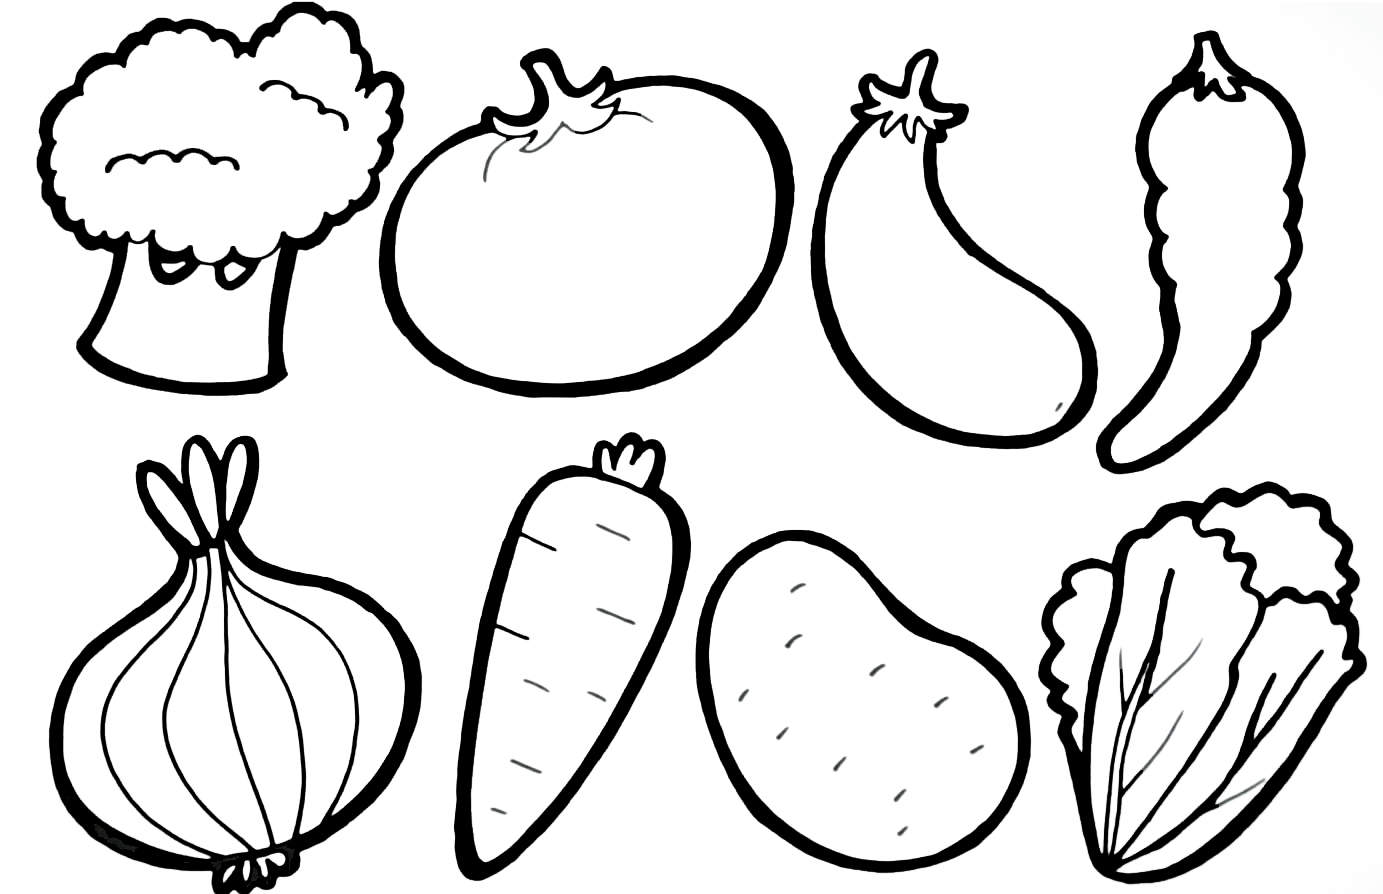 Coloring page For kids Vegetables